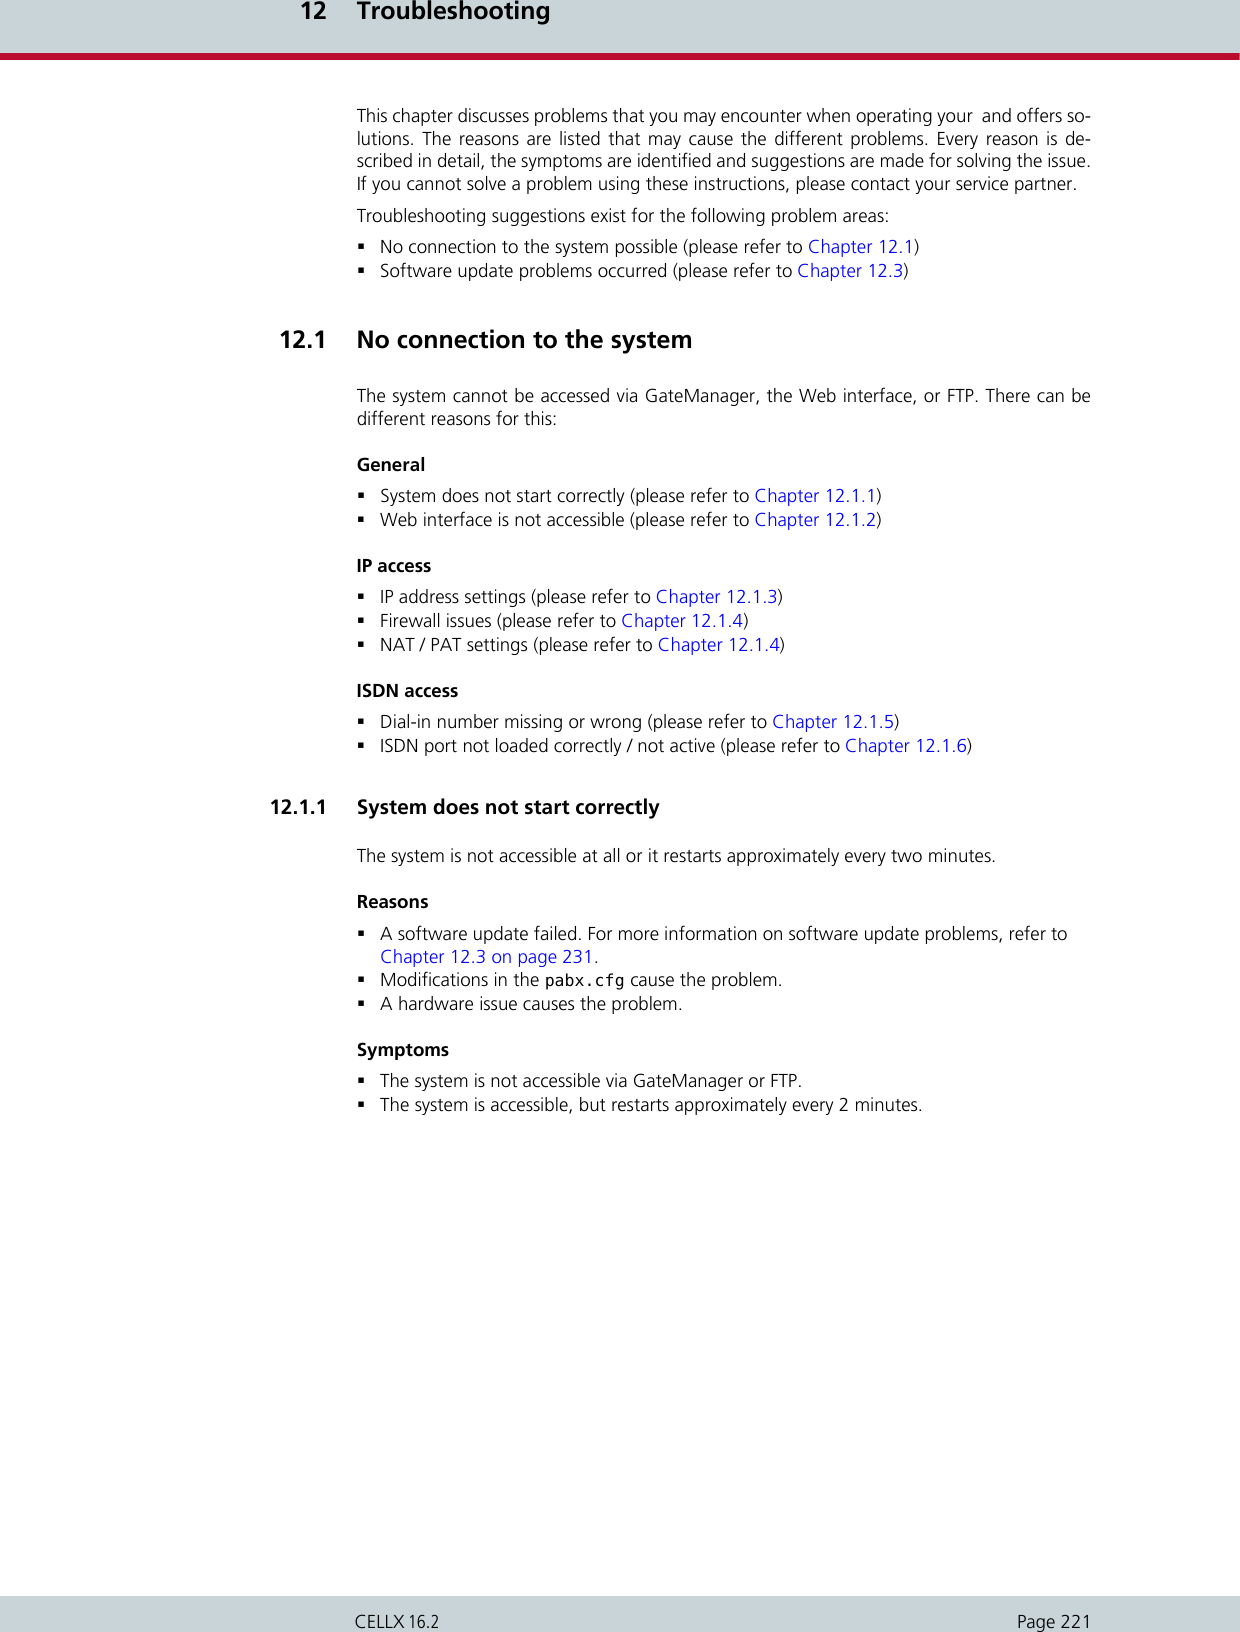 12 TroubleshootingPage 221CELLX 16.2This chapter discusses problems that you may encounter when operating your  and offers so-lutions. The reasons are listed that may cause the different problems. Every reason is de-scribed in detail, the symptoms are identified and suggestions are made for solving the issue.If you cannot solve a problem using these instructions, please contact your service partner.Troubleshooting suggestions exist for the following problem areas:No connection to the system possible (please refer to Chapter 12.1) Software update problems occurred (please refer to Chapter 12.3)12.1  No connection to the systemThe system cannot be accessed via GateManager, the Web interface, or FTP. There can bedifferent reasons for this:GeneralSystem does not start correctly (please refer to Chapter 12.1.1)Web interface is not accessible (please refer to Chapter 12.1.2)IP accessIP address settings (please refer to Chapter 12.1.3)Firewall issues (please refer to Chapter 12.1.4)NAT / PAT settings (please refer to Chapter 12.1.4)ISDN accessDial-in number missing or wrong (please refer to Chapter 12.1.5)ISDN port not loaded correctly / not active (please refer to Chapter 12.1.6)12.1.1  System does not start correctlyThe system is not accessible at all or it restarts approximately every two minutes.ReasonsA software update failed. For more information on software update problems, refer toChapter 12.3 on page 231.Modifications in the pabx.cfg cause the problem.A hardware issue causes the problem.SymptomsThe system is not accessible via GateManager or FTP.The system is accessible, but restarts approximately every 2 minutes.